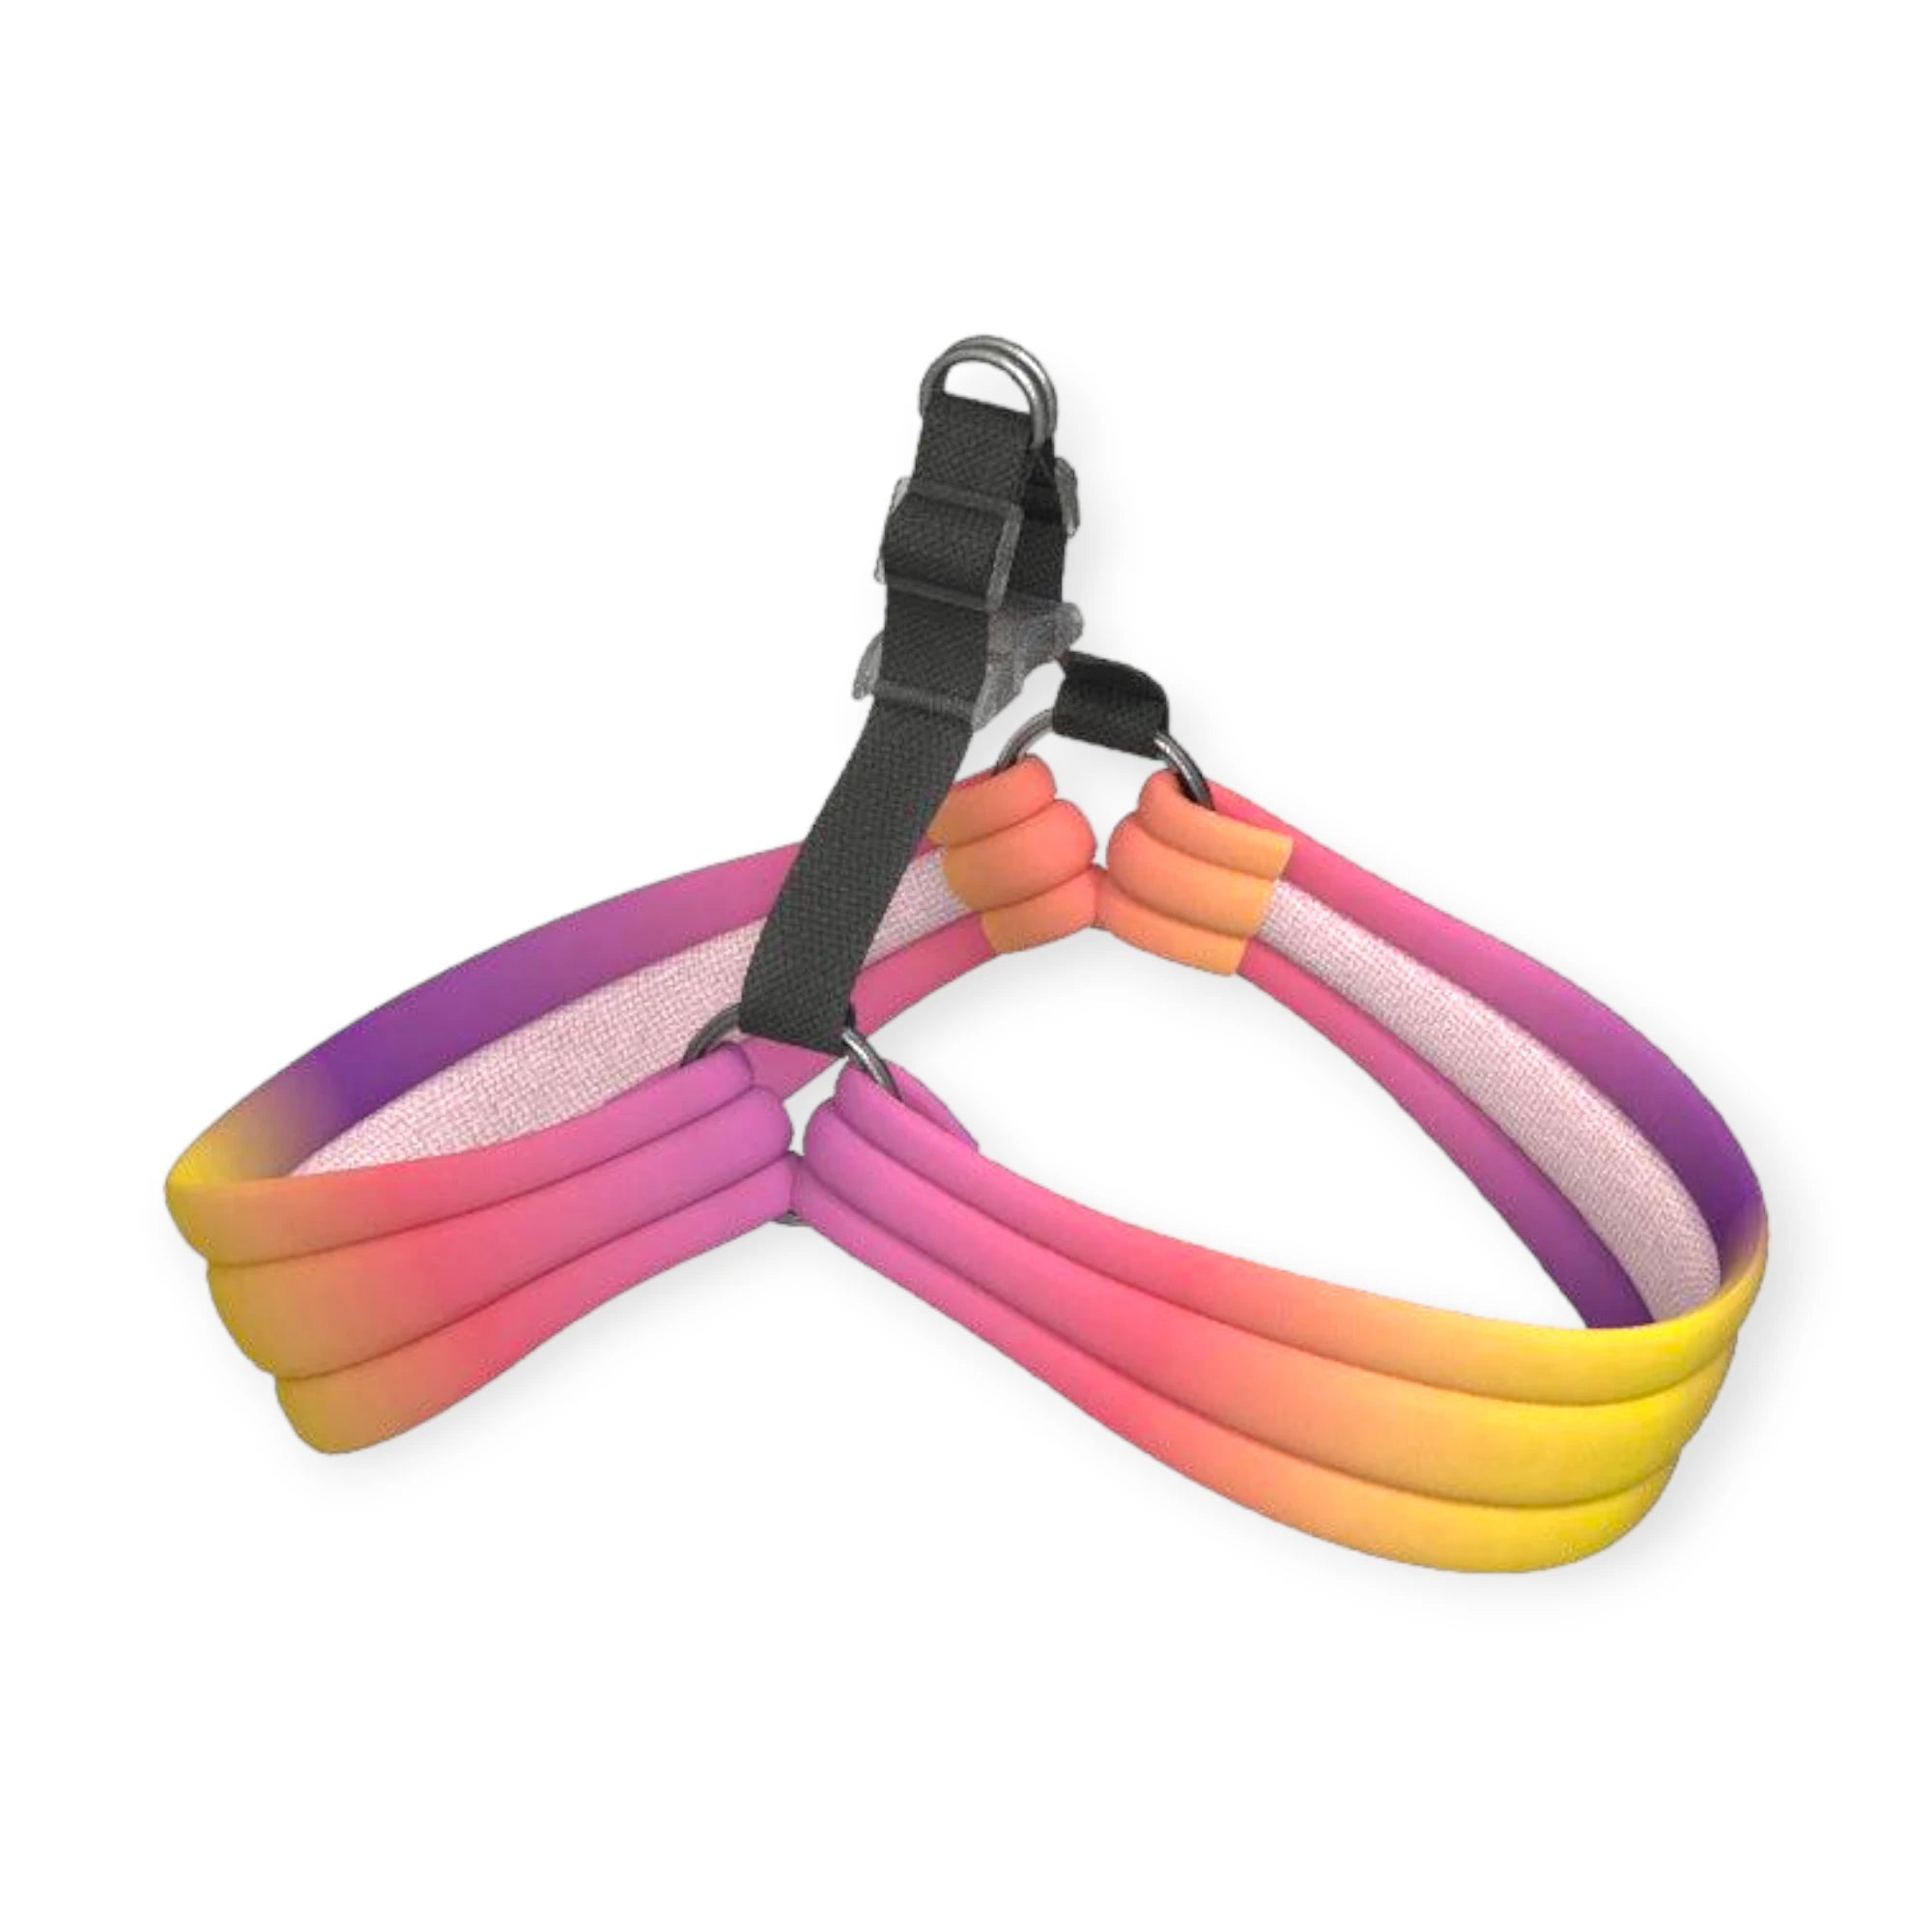 PIDAN Soft-Touch Dog Harness in Gradient Colors